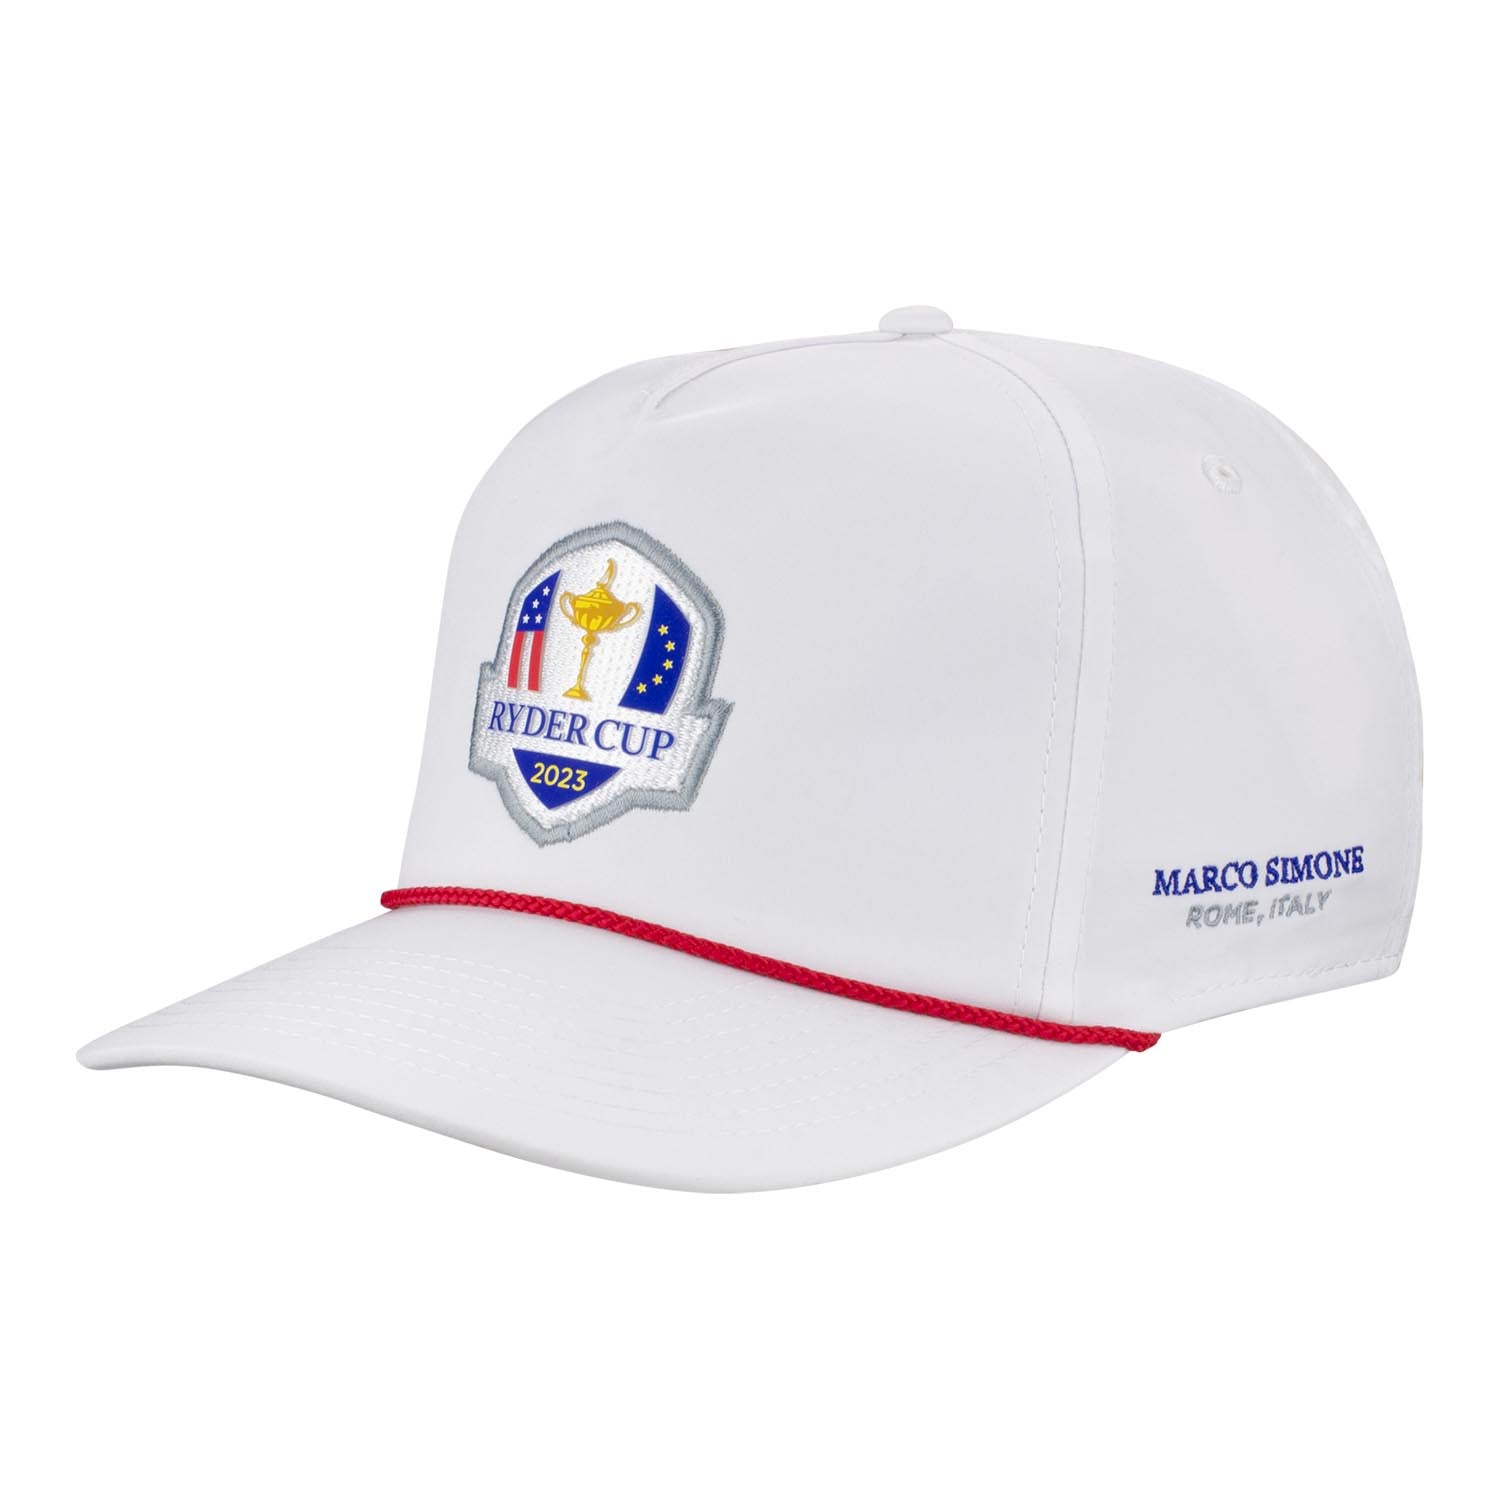 2023 Ryder Cup Hats & Beanies - The Official European Ryder Cup Shop